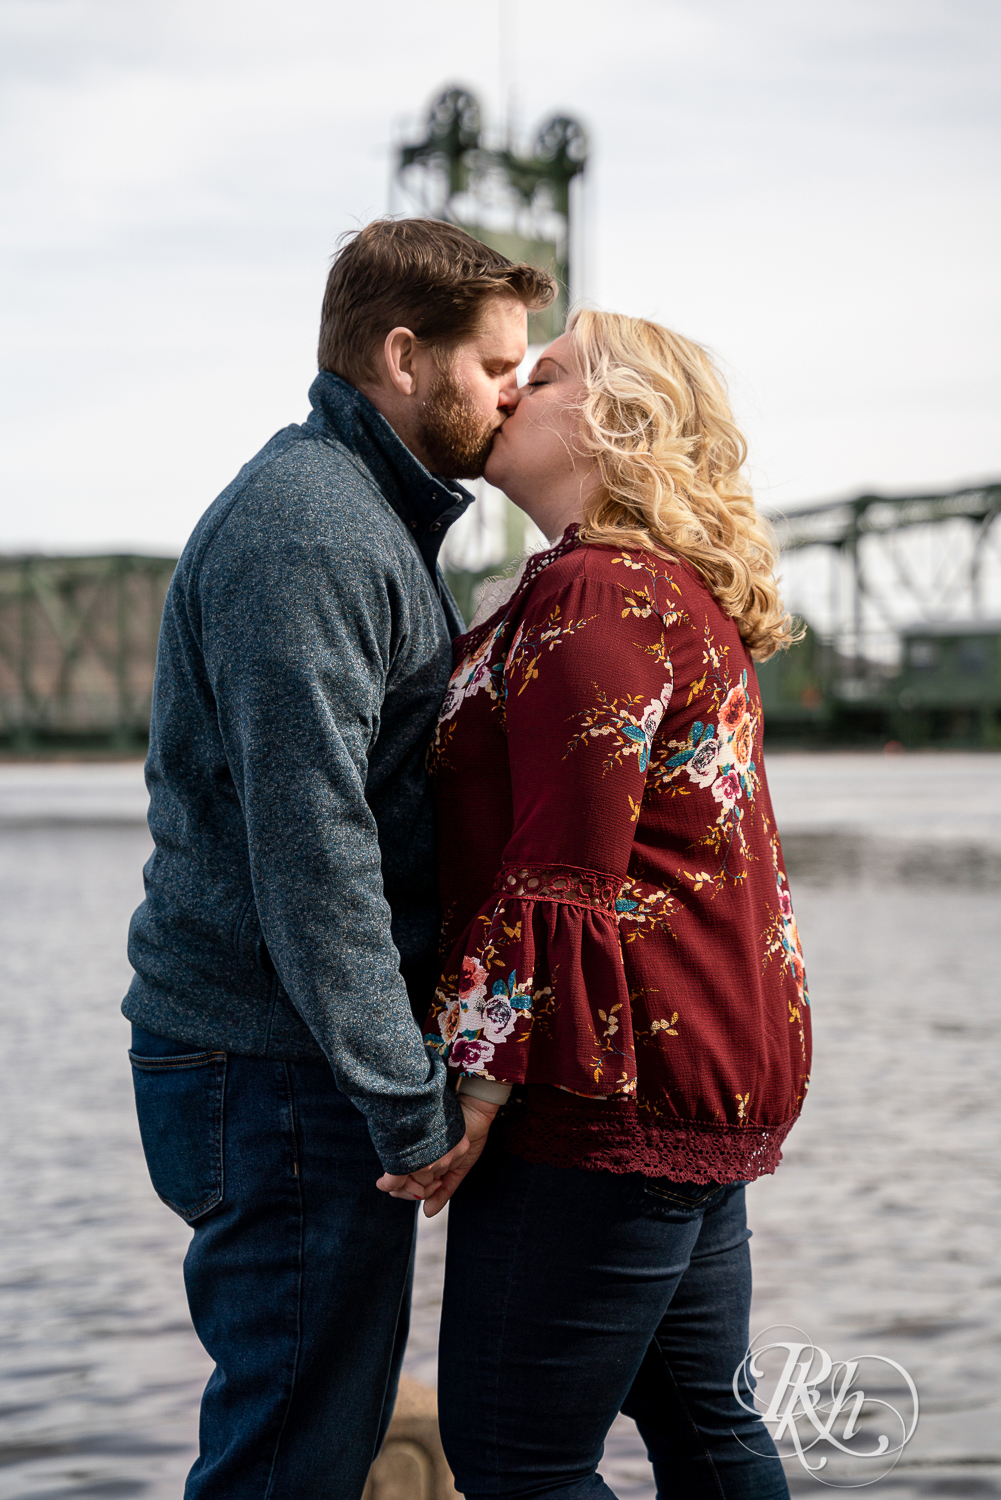 Blond woman and bearded man kiss on bridge over river in Stillwater, Minnesota.